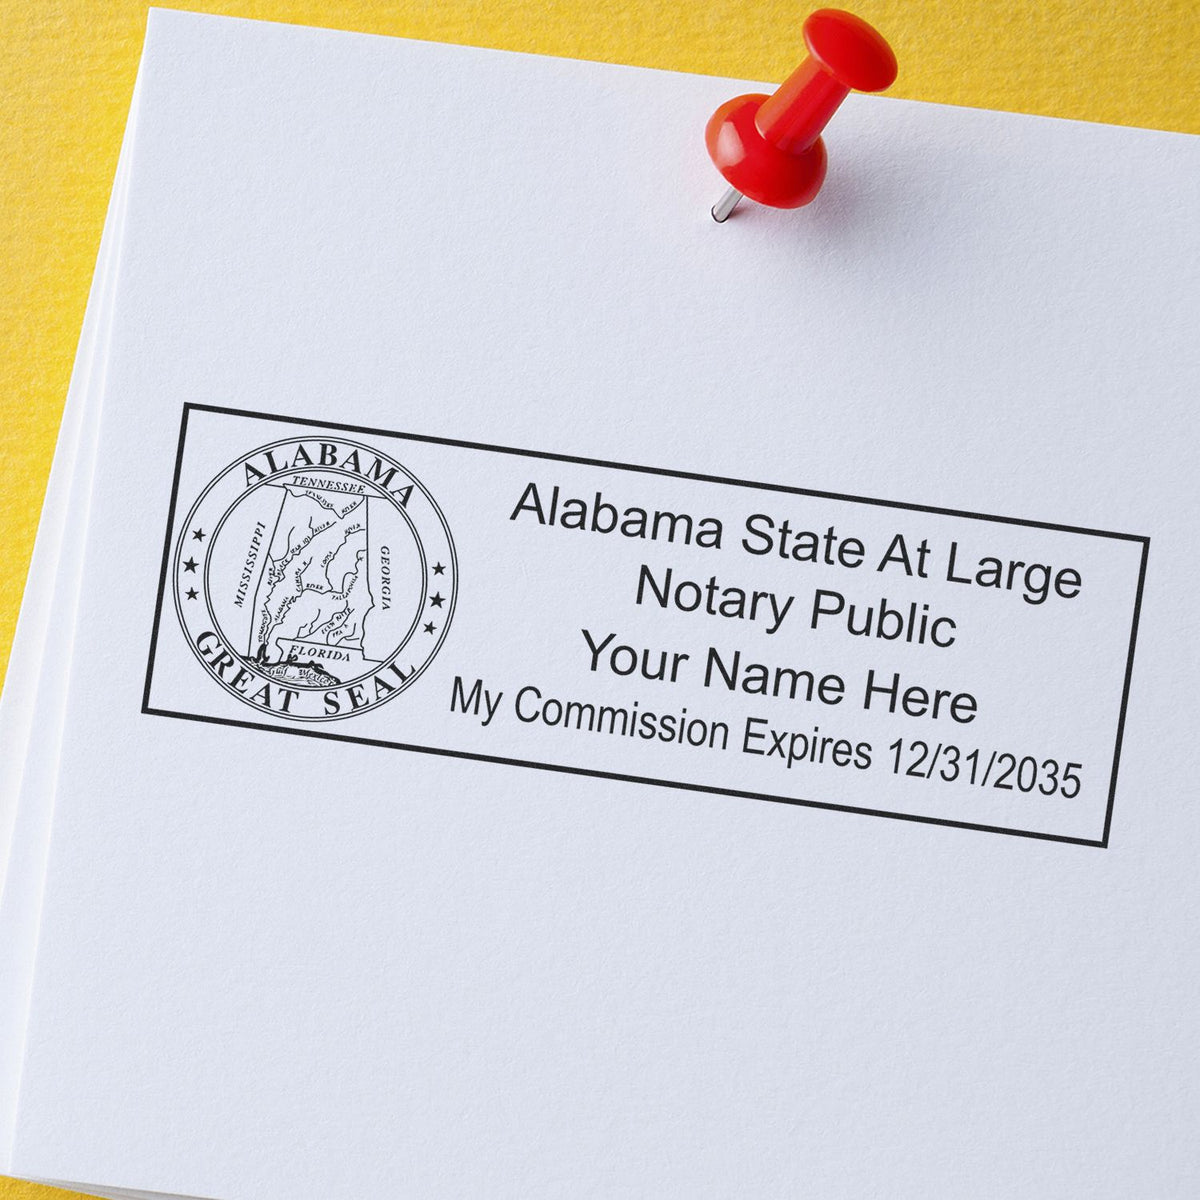 A lifestyle photo showing a stamped image of the Heavy-Duty Alabama Rectangular Notary Stamp on a piece of paper